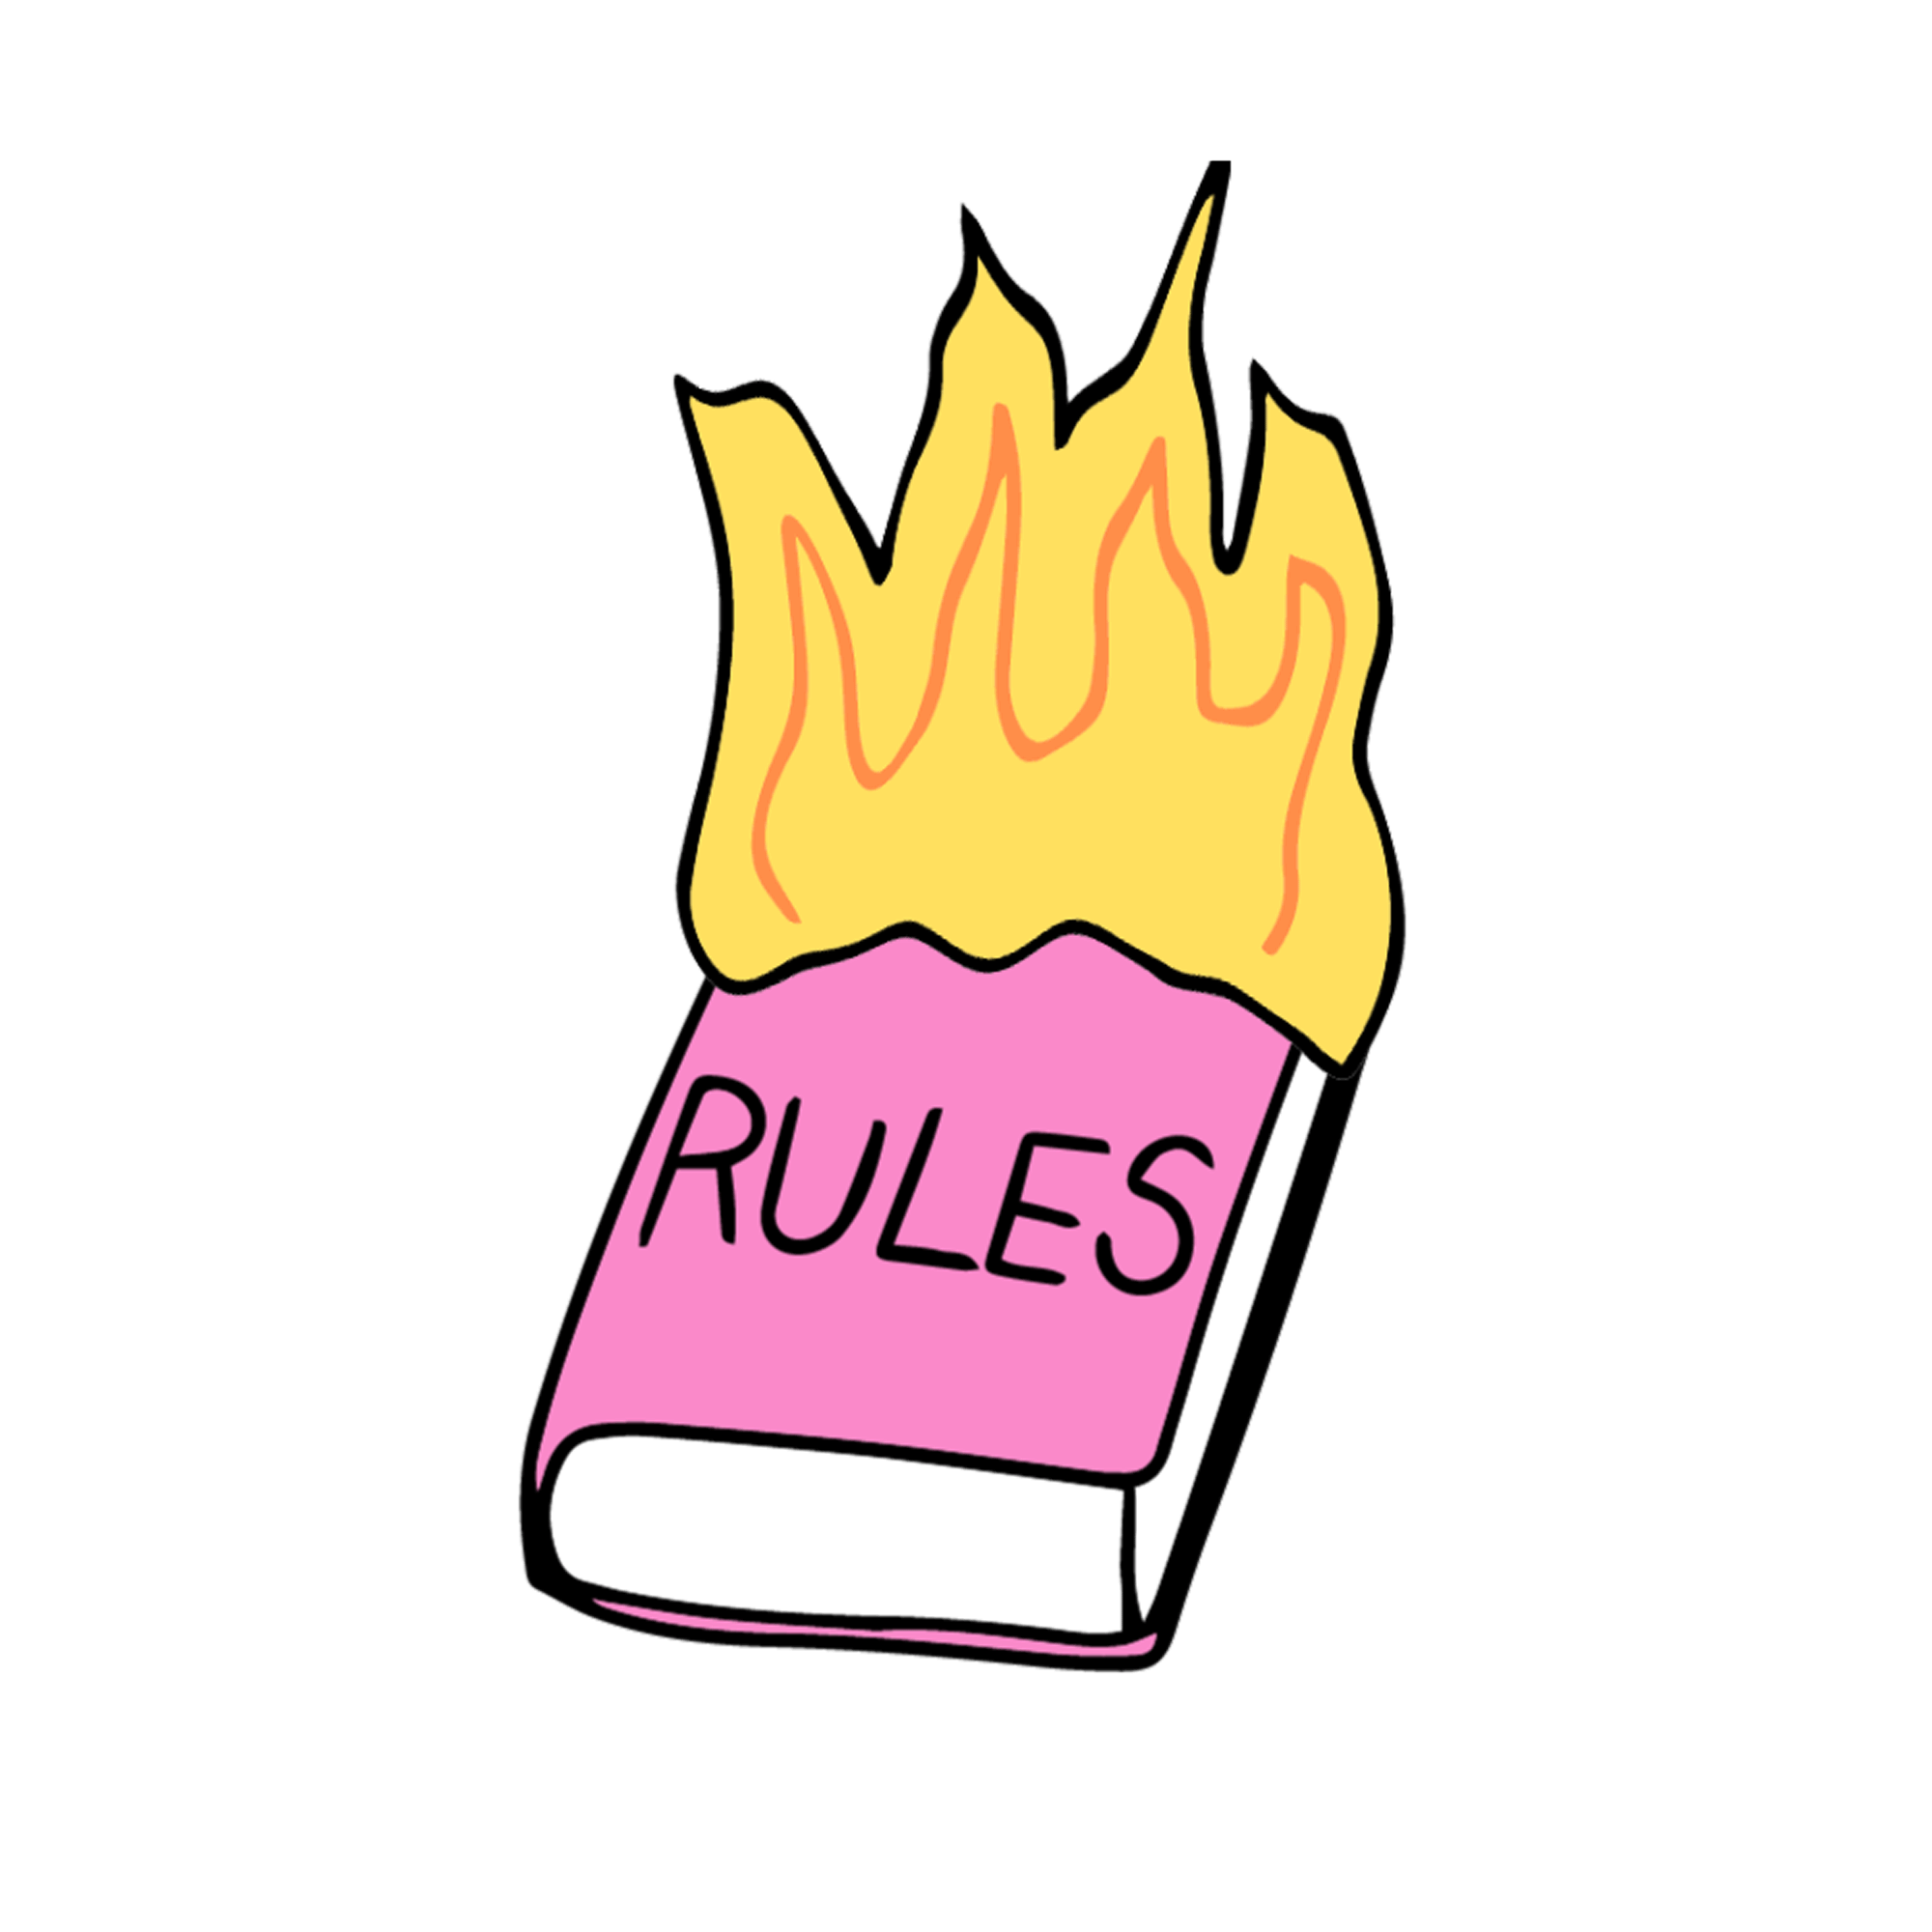 A GIF of a rulebook on fire with flames coming out the top